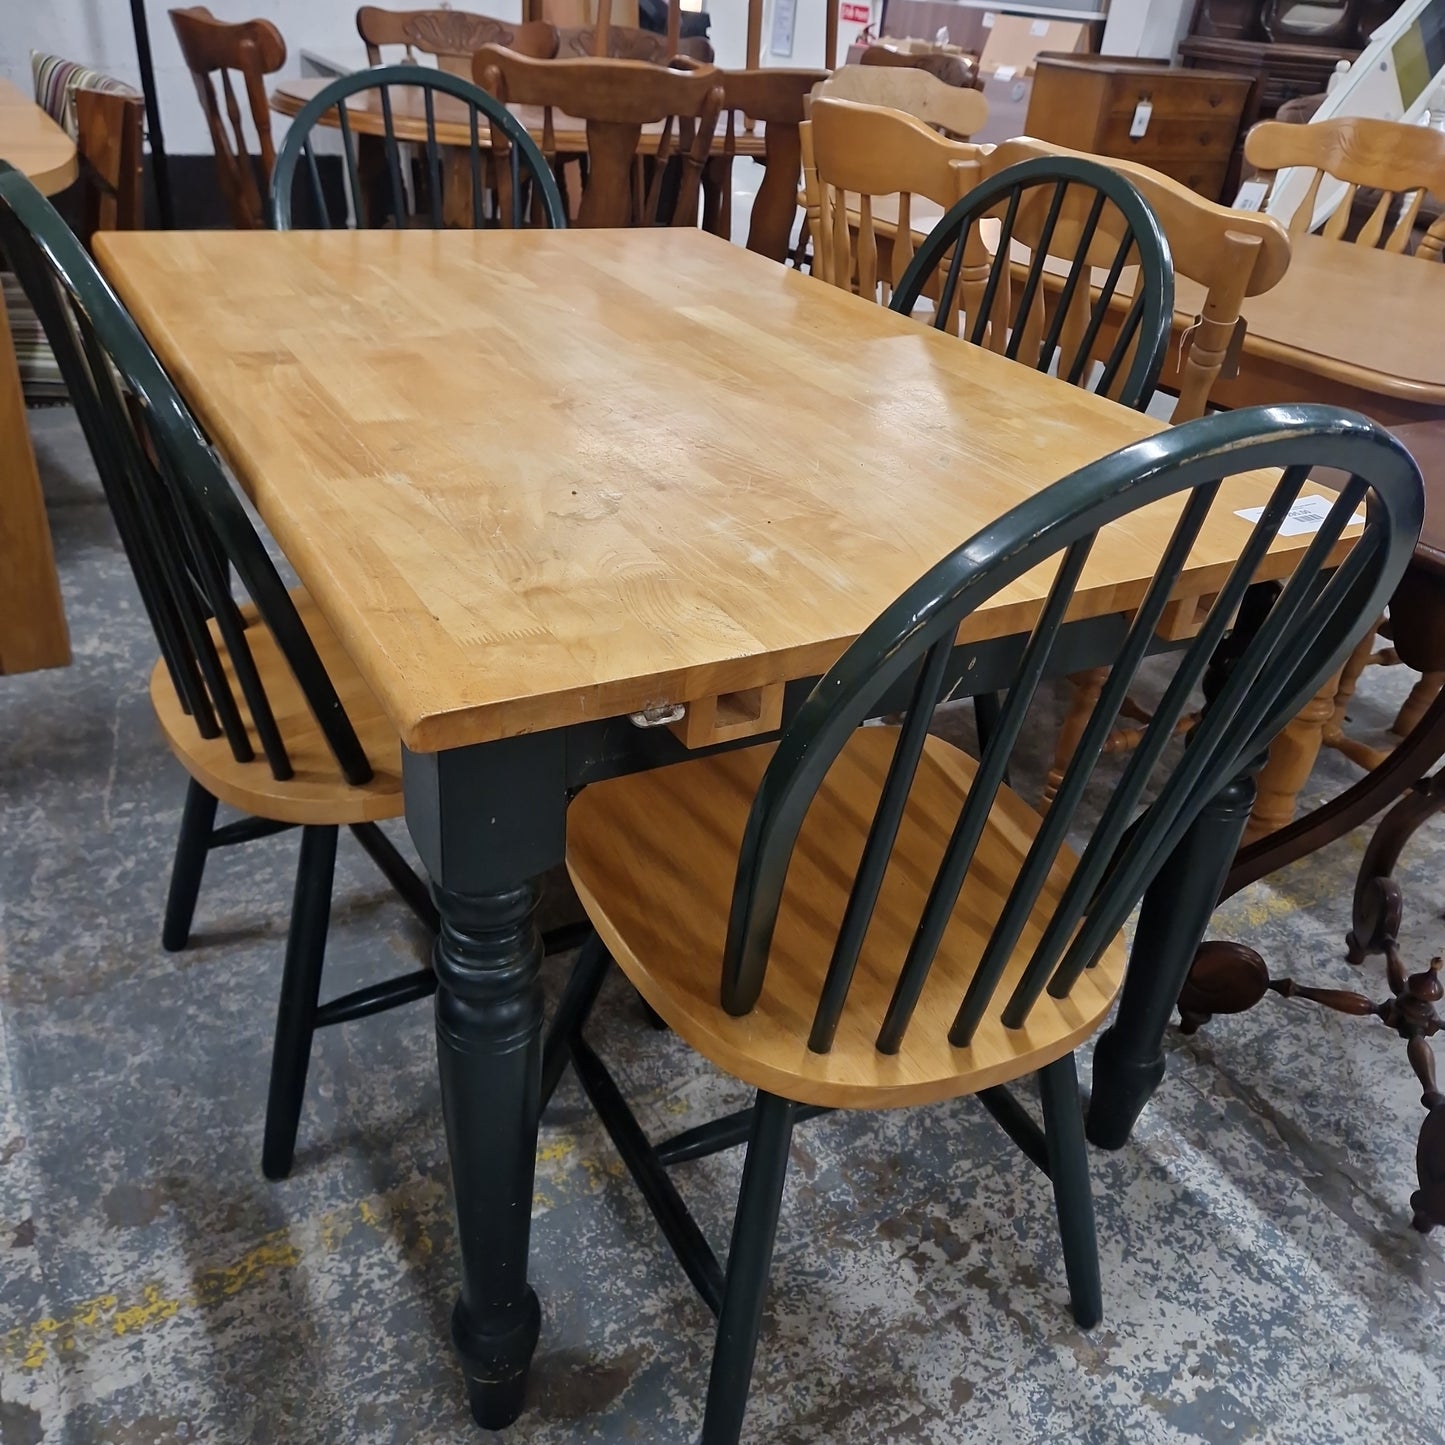 Hardwood oval drop leaf kitchen table with green legs and 4 no. matching chairs